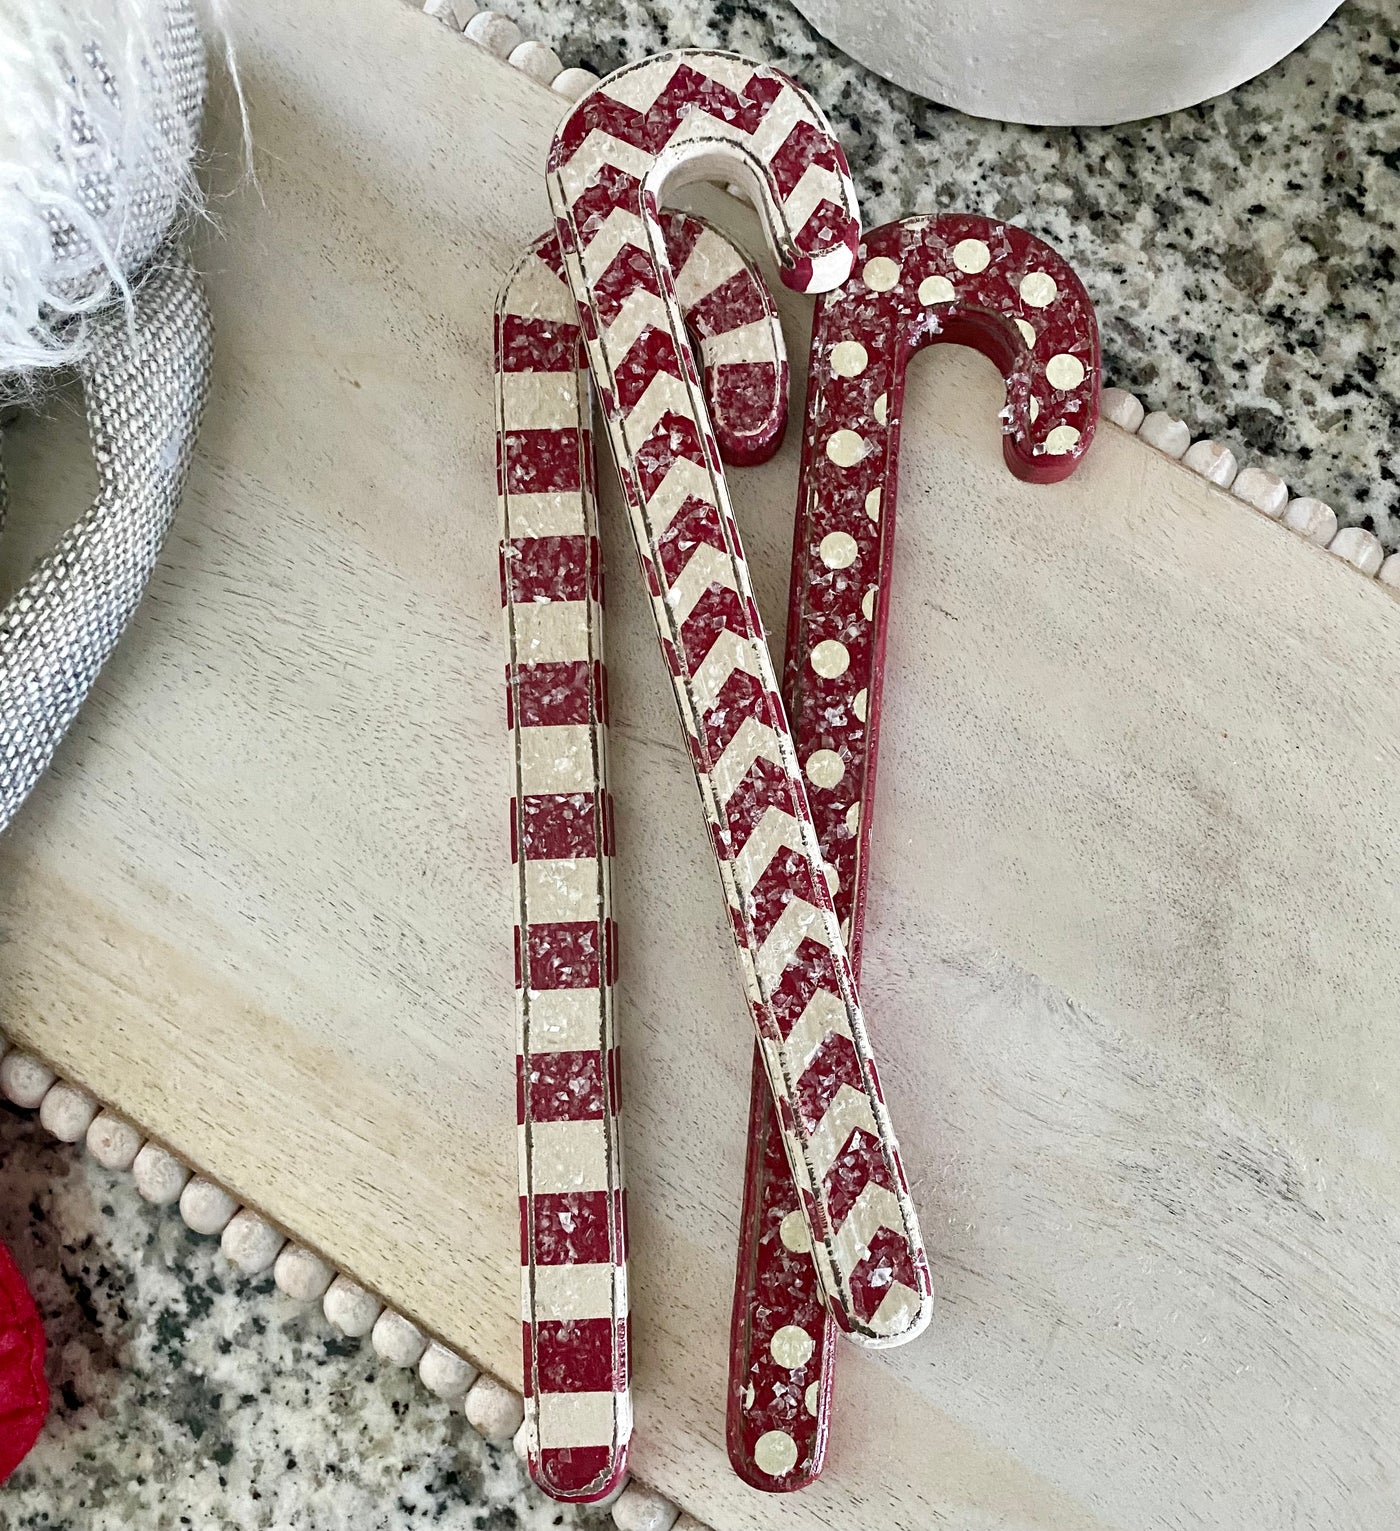 Rustic Wooden Candy Canes